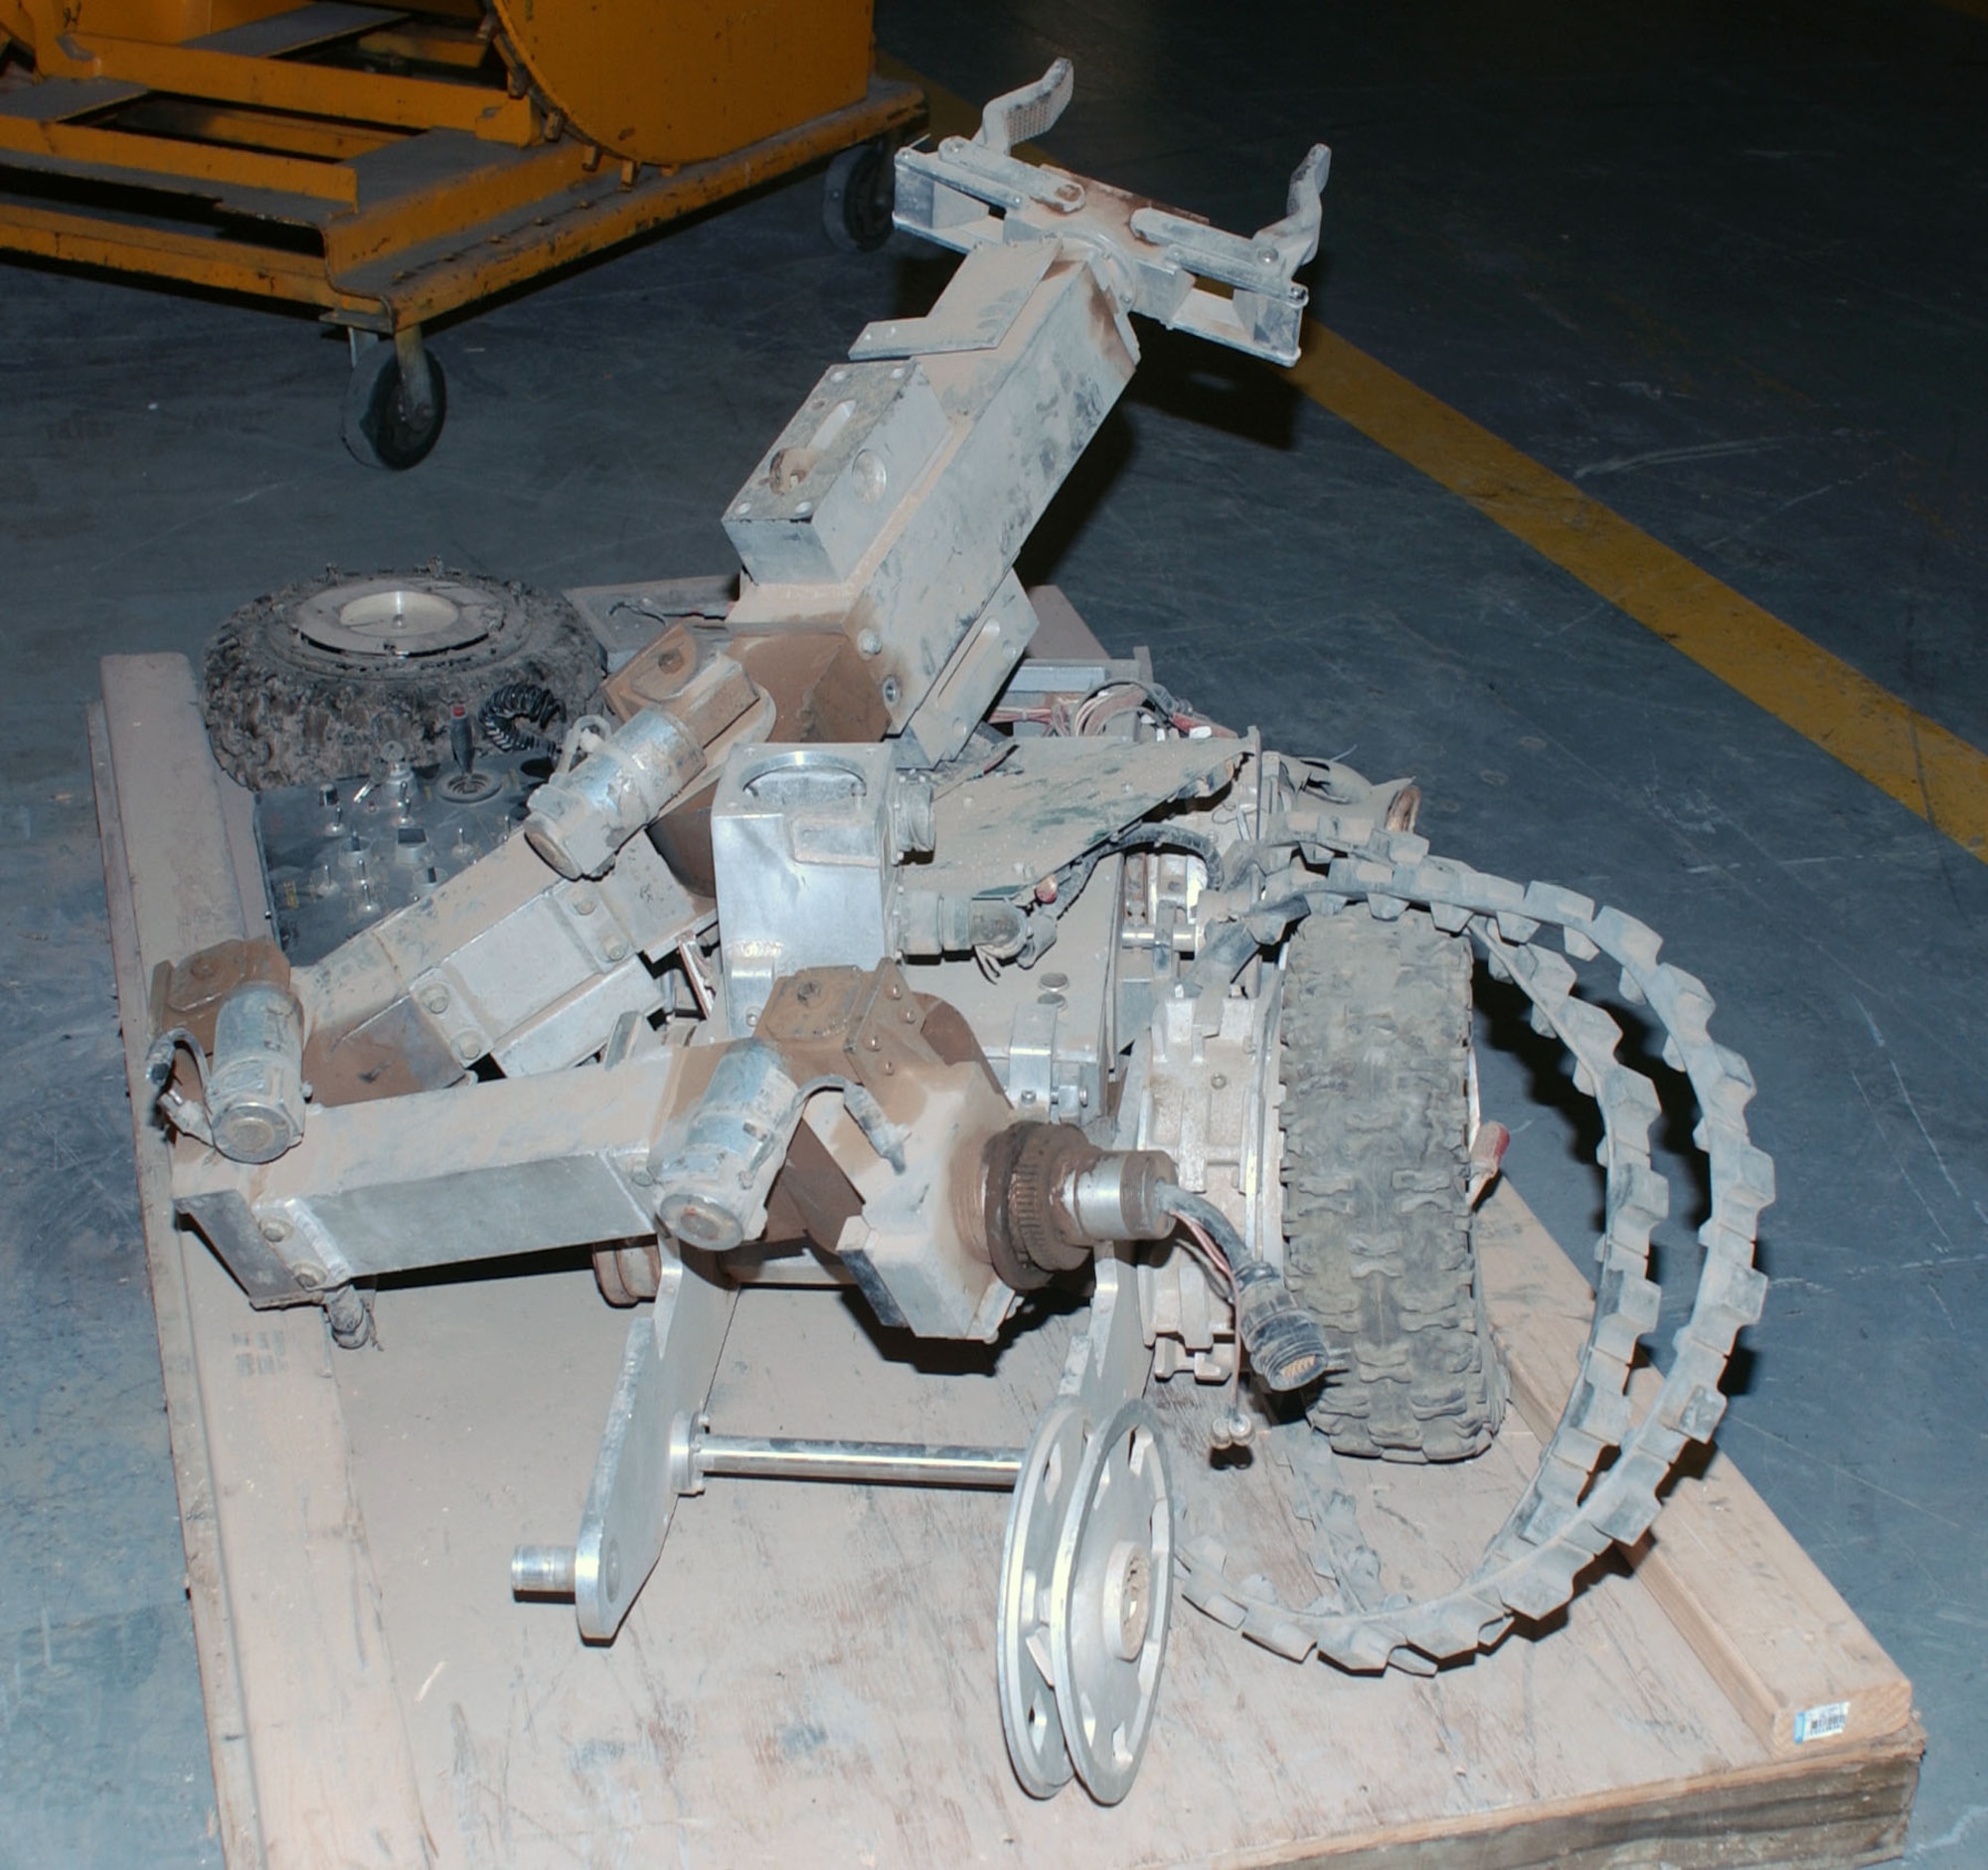 This robot, controlled by an Air Force Explosive Ordnance Disposal (EOD) team, was destroyed by an improvised explosive device during Operation Iraqi Freedom. (U.S. Air Force photo)